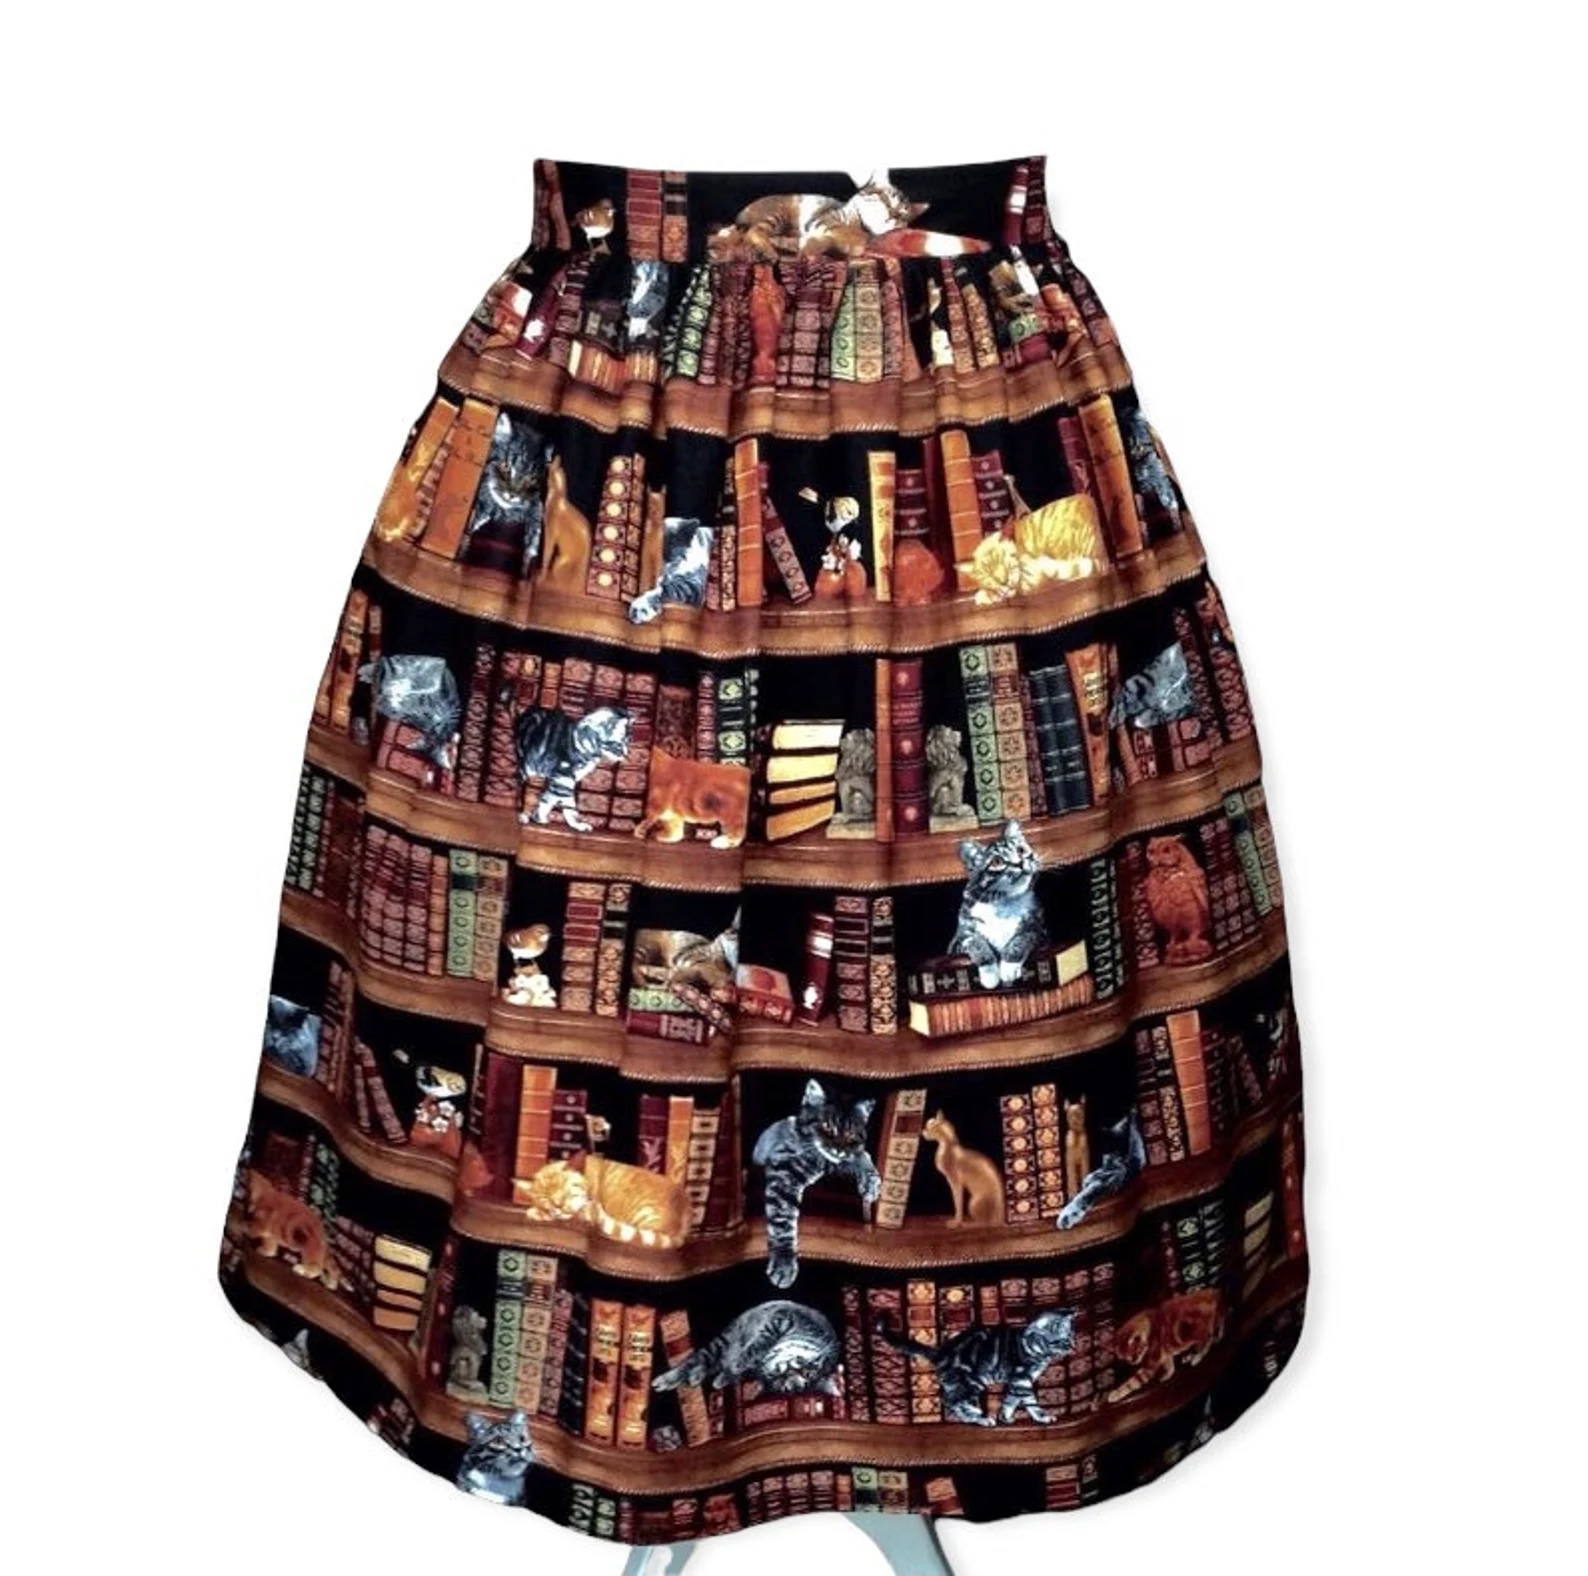 A skirt printed with a pattern of bookshelves stuffed with old-fashioned books and cats of various colors and sizes.